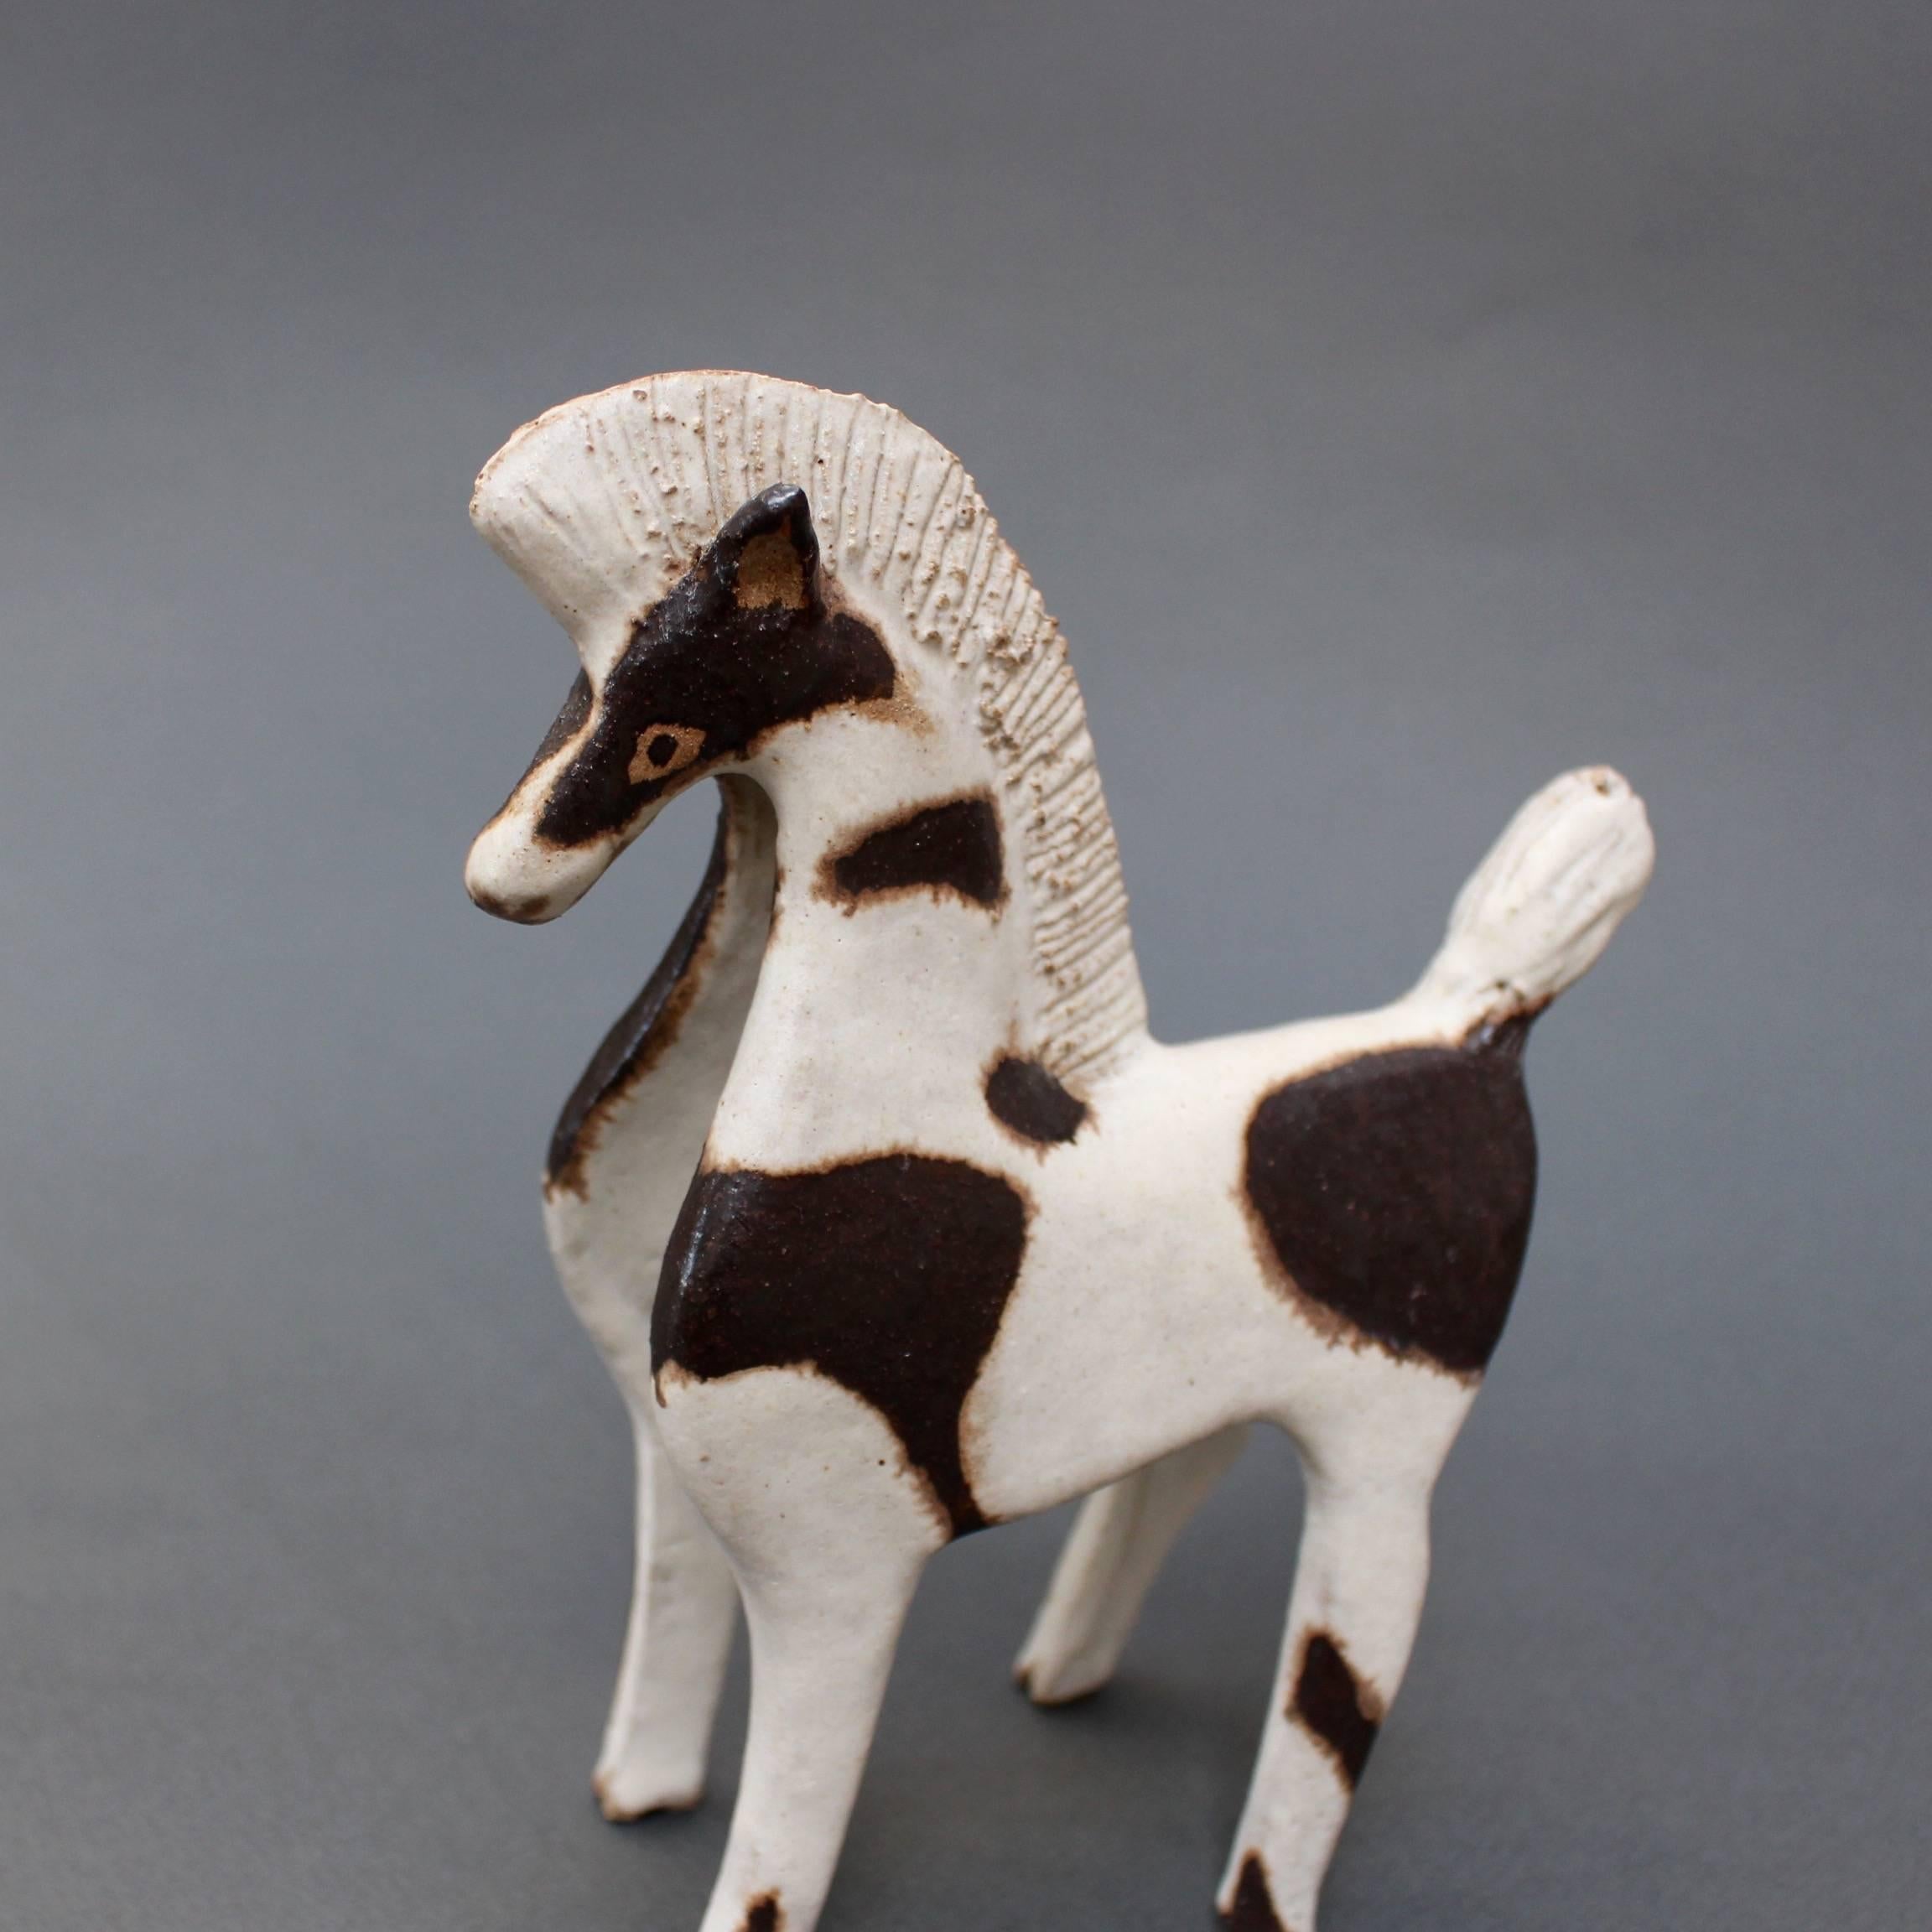 Ceramic two-toned horse by ceramicist Bruno Gambone, (circa 1970s). A charming ceramic parade horse with groomed mane and tail in Gambone's signature chalk-white glaze. The glaze is beautifully complemented by chocolate-brown markings on the horse's